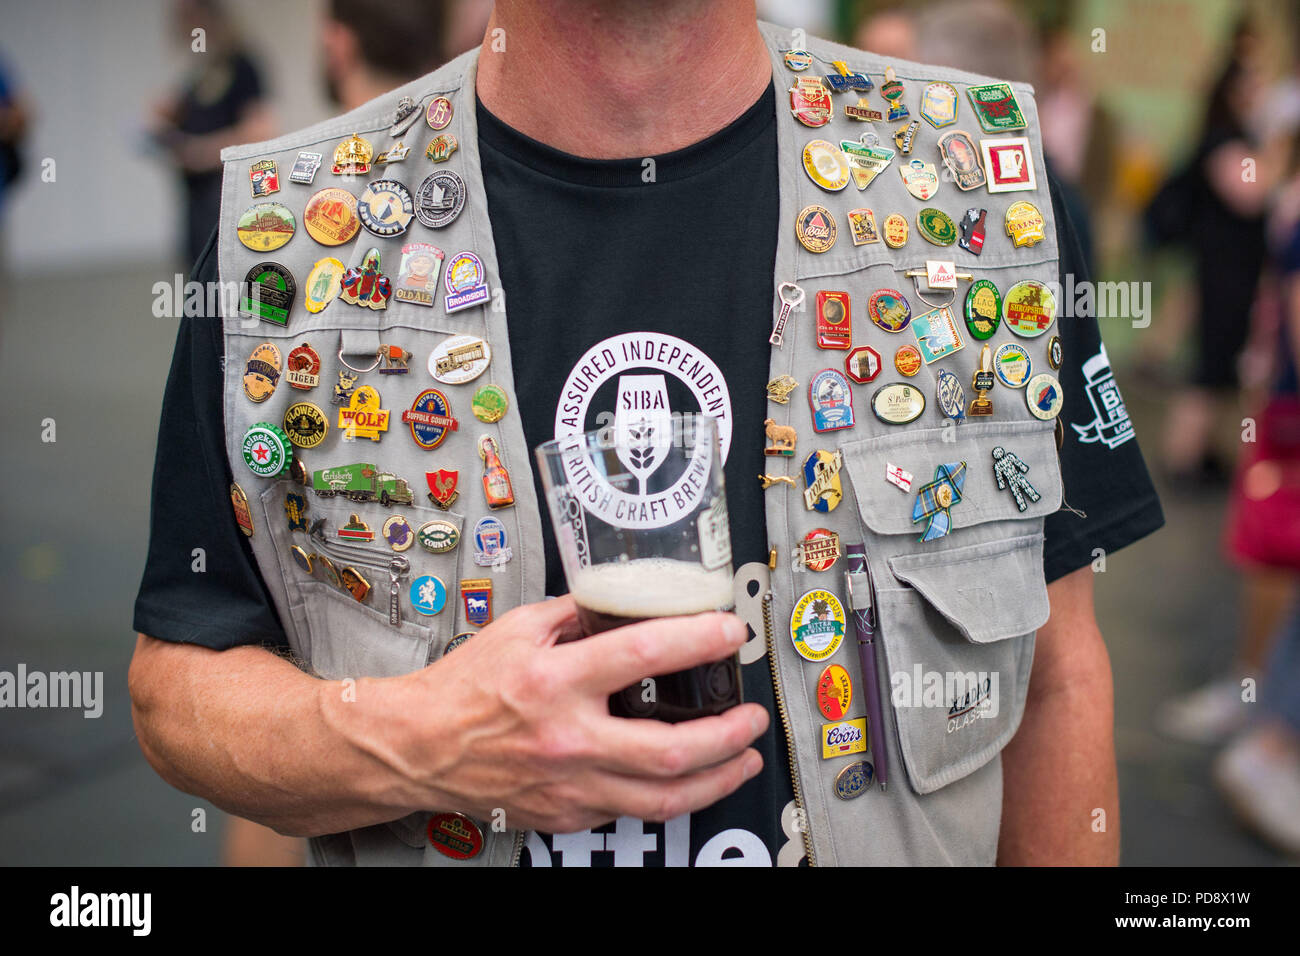 A visitor wearing a jacket covered in brewery and beer badges during the CAMRA Great British Beer Festival at Olympia in London, to sample craft beers and real ales from around the world. Stock Photo